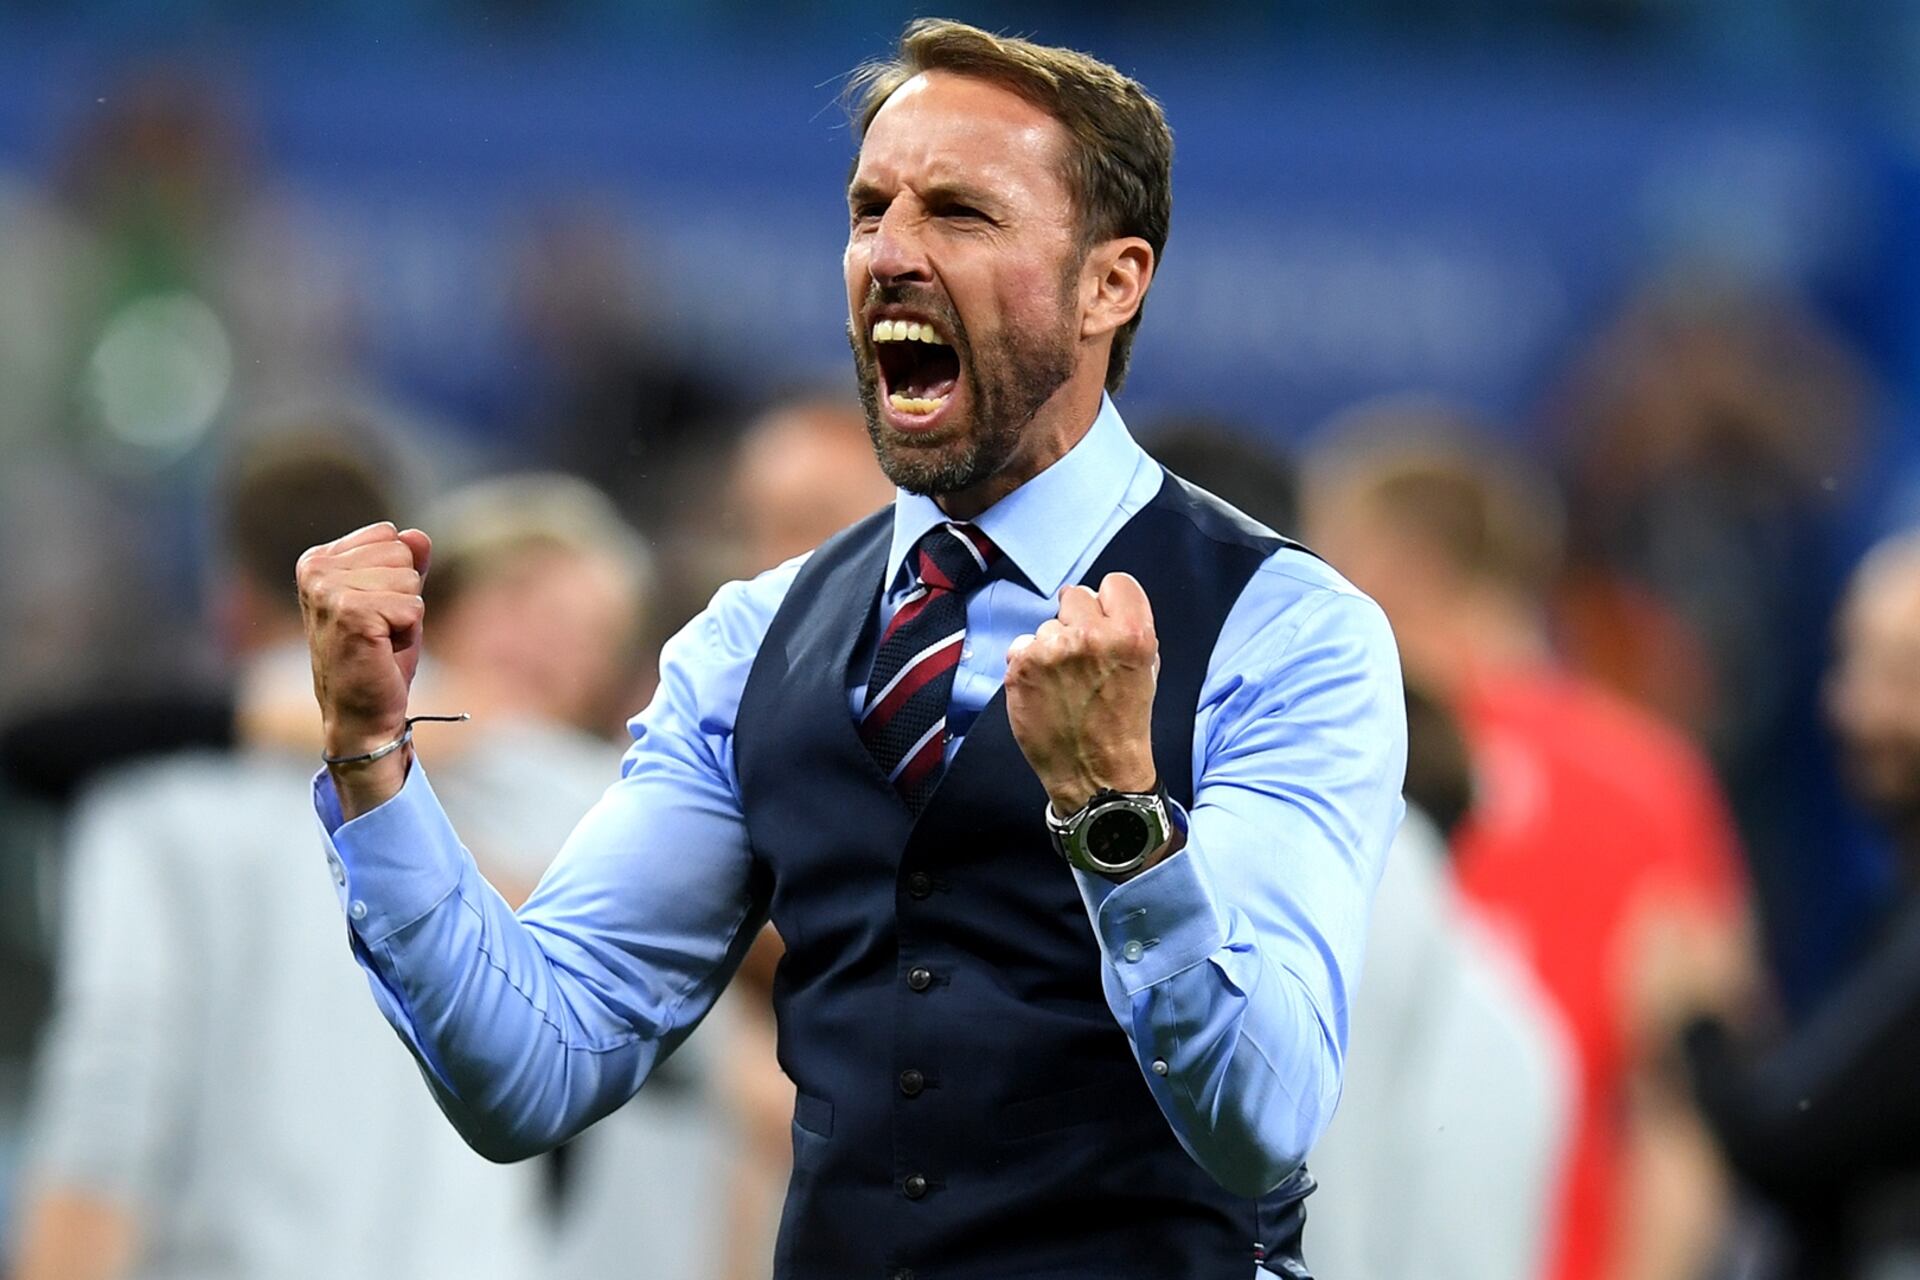 How much fortune has Gareth Southgate withdrawn as England manager?